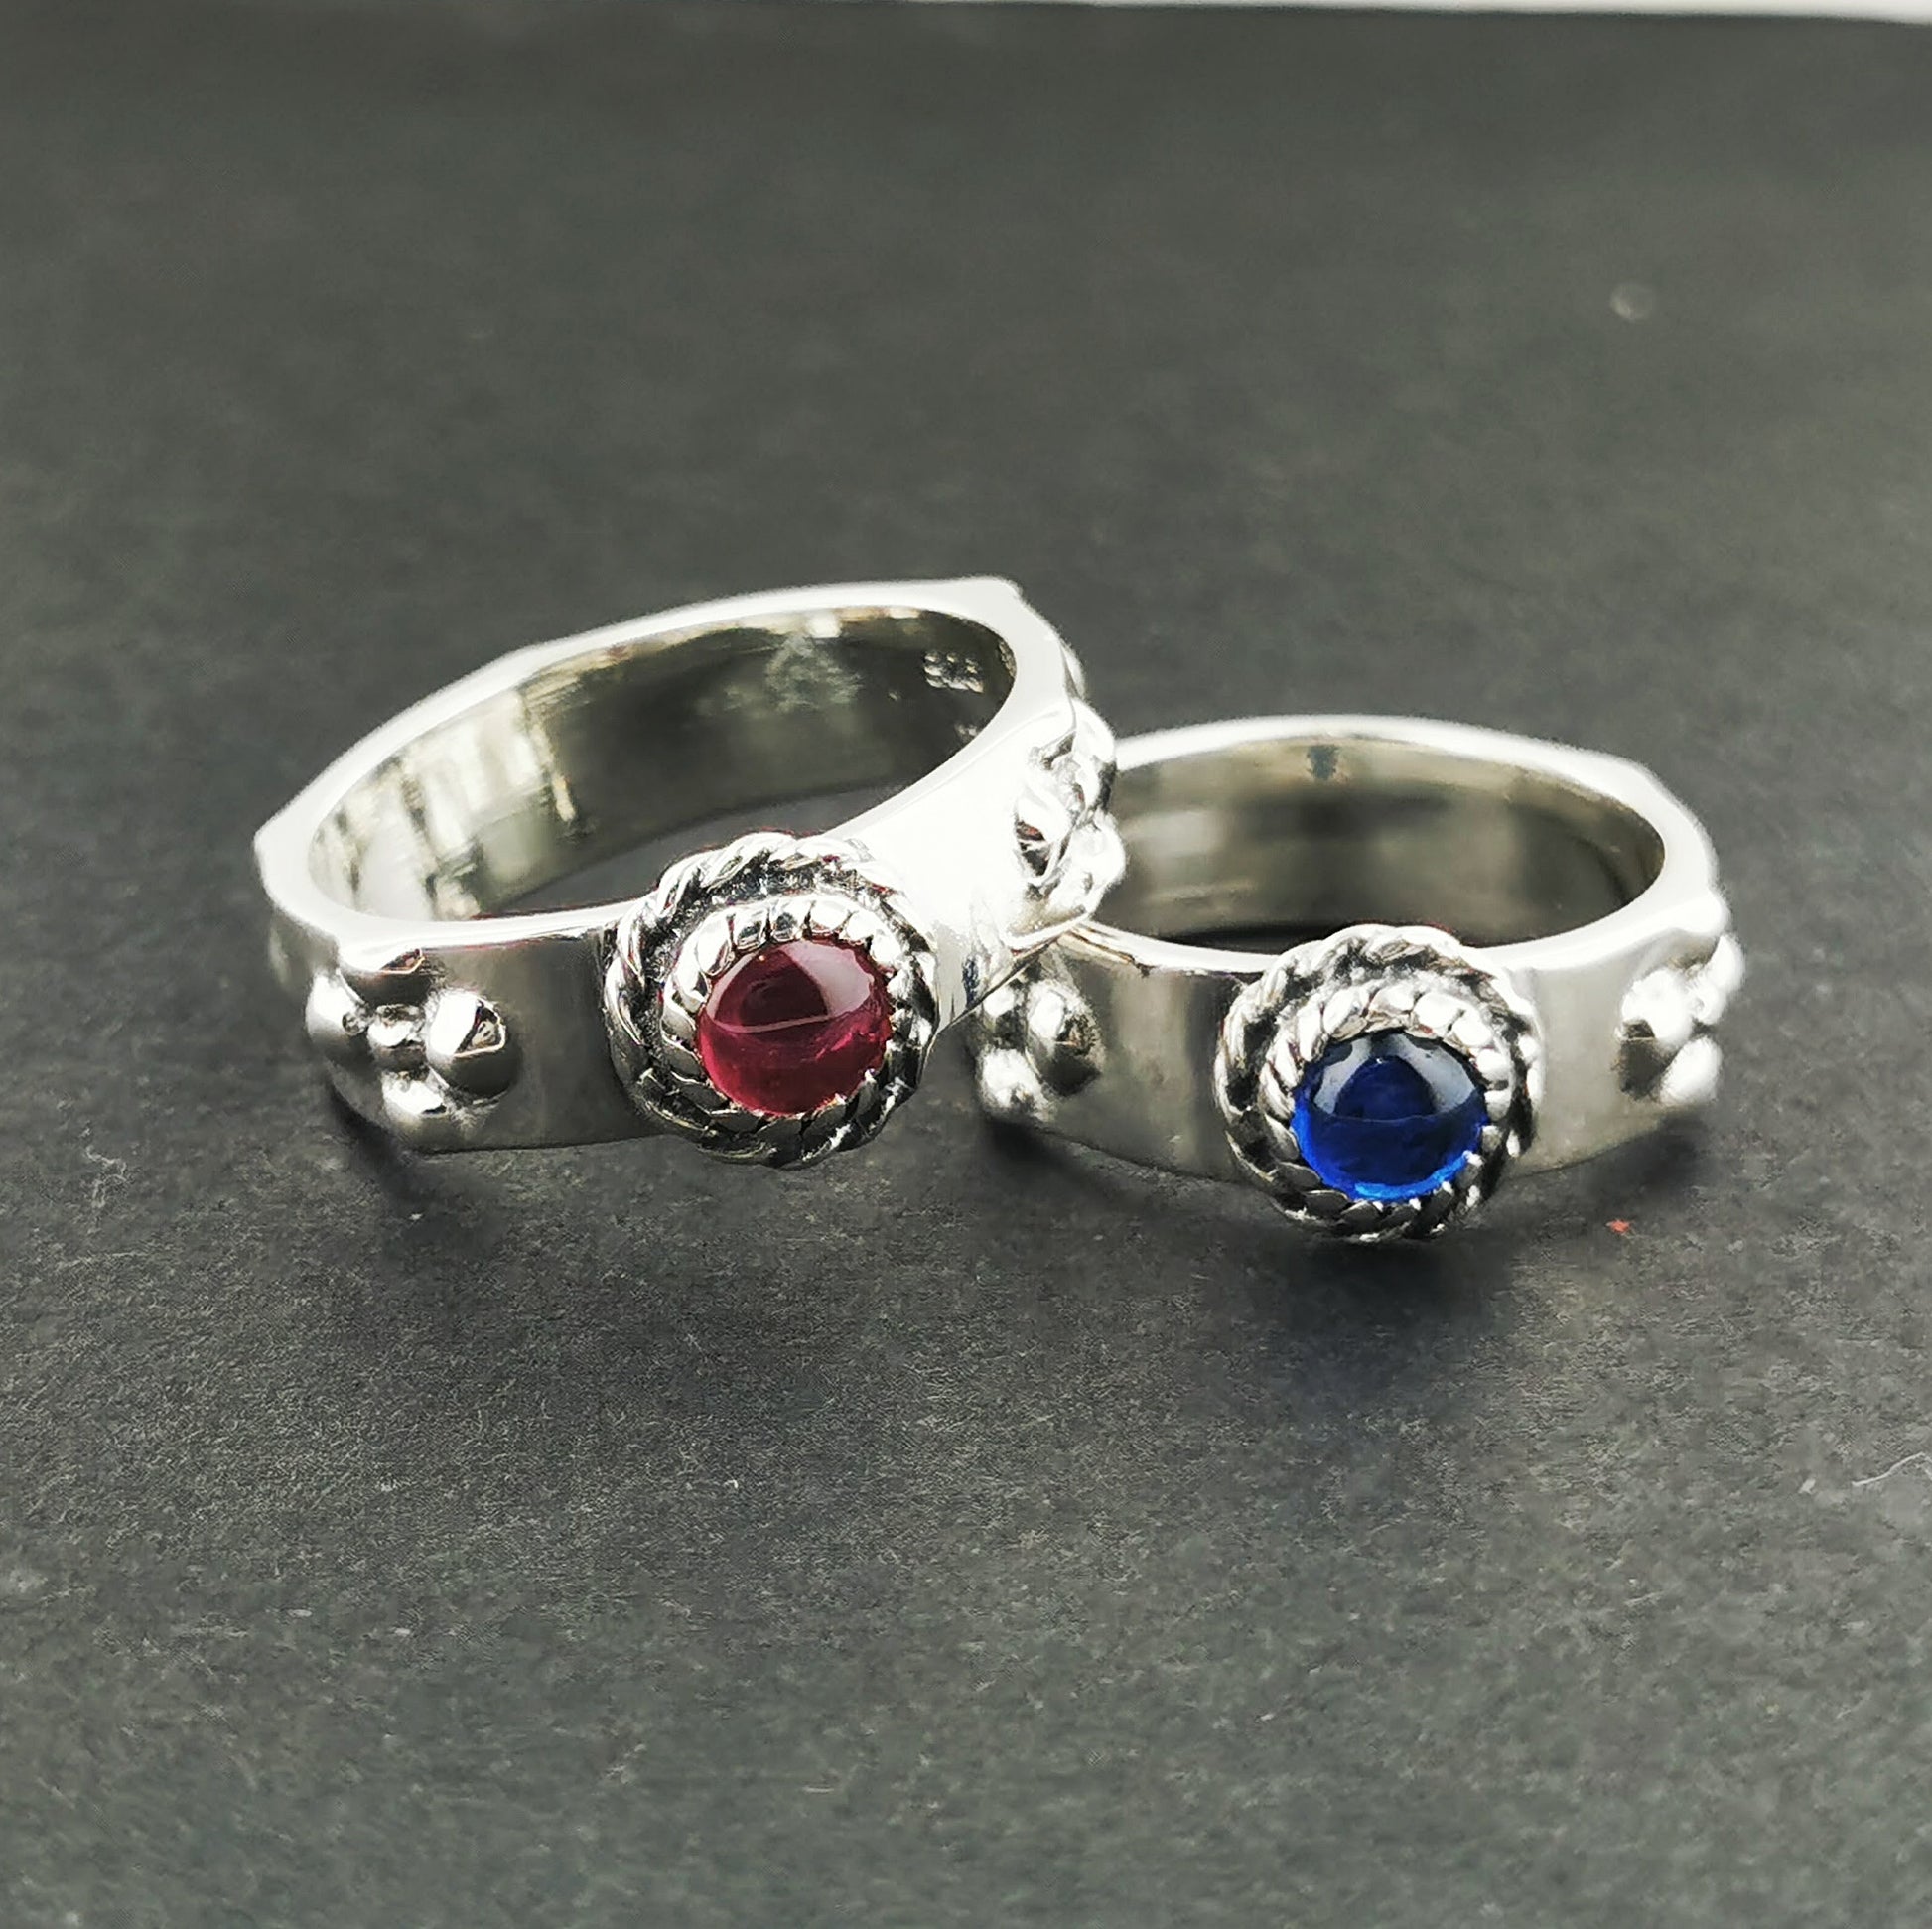 Matching Howl and Sophie Set of Two Rings in Sterling Silver, Howls Moving Castle Wedding Set, Birthstone Wedding Band Set